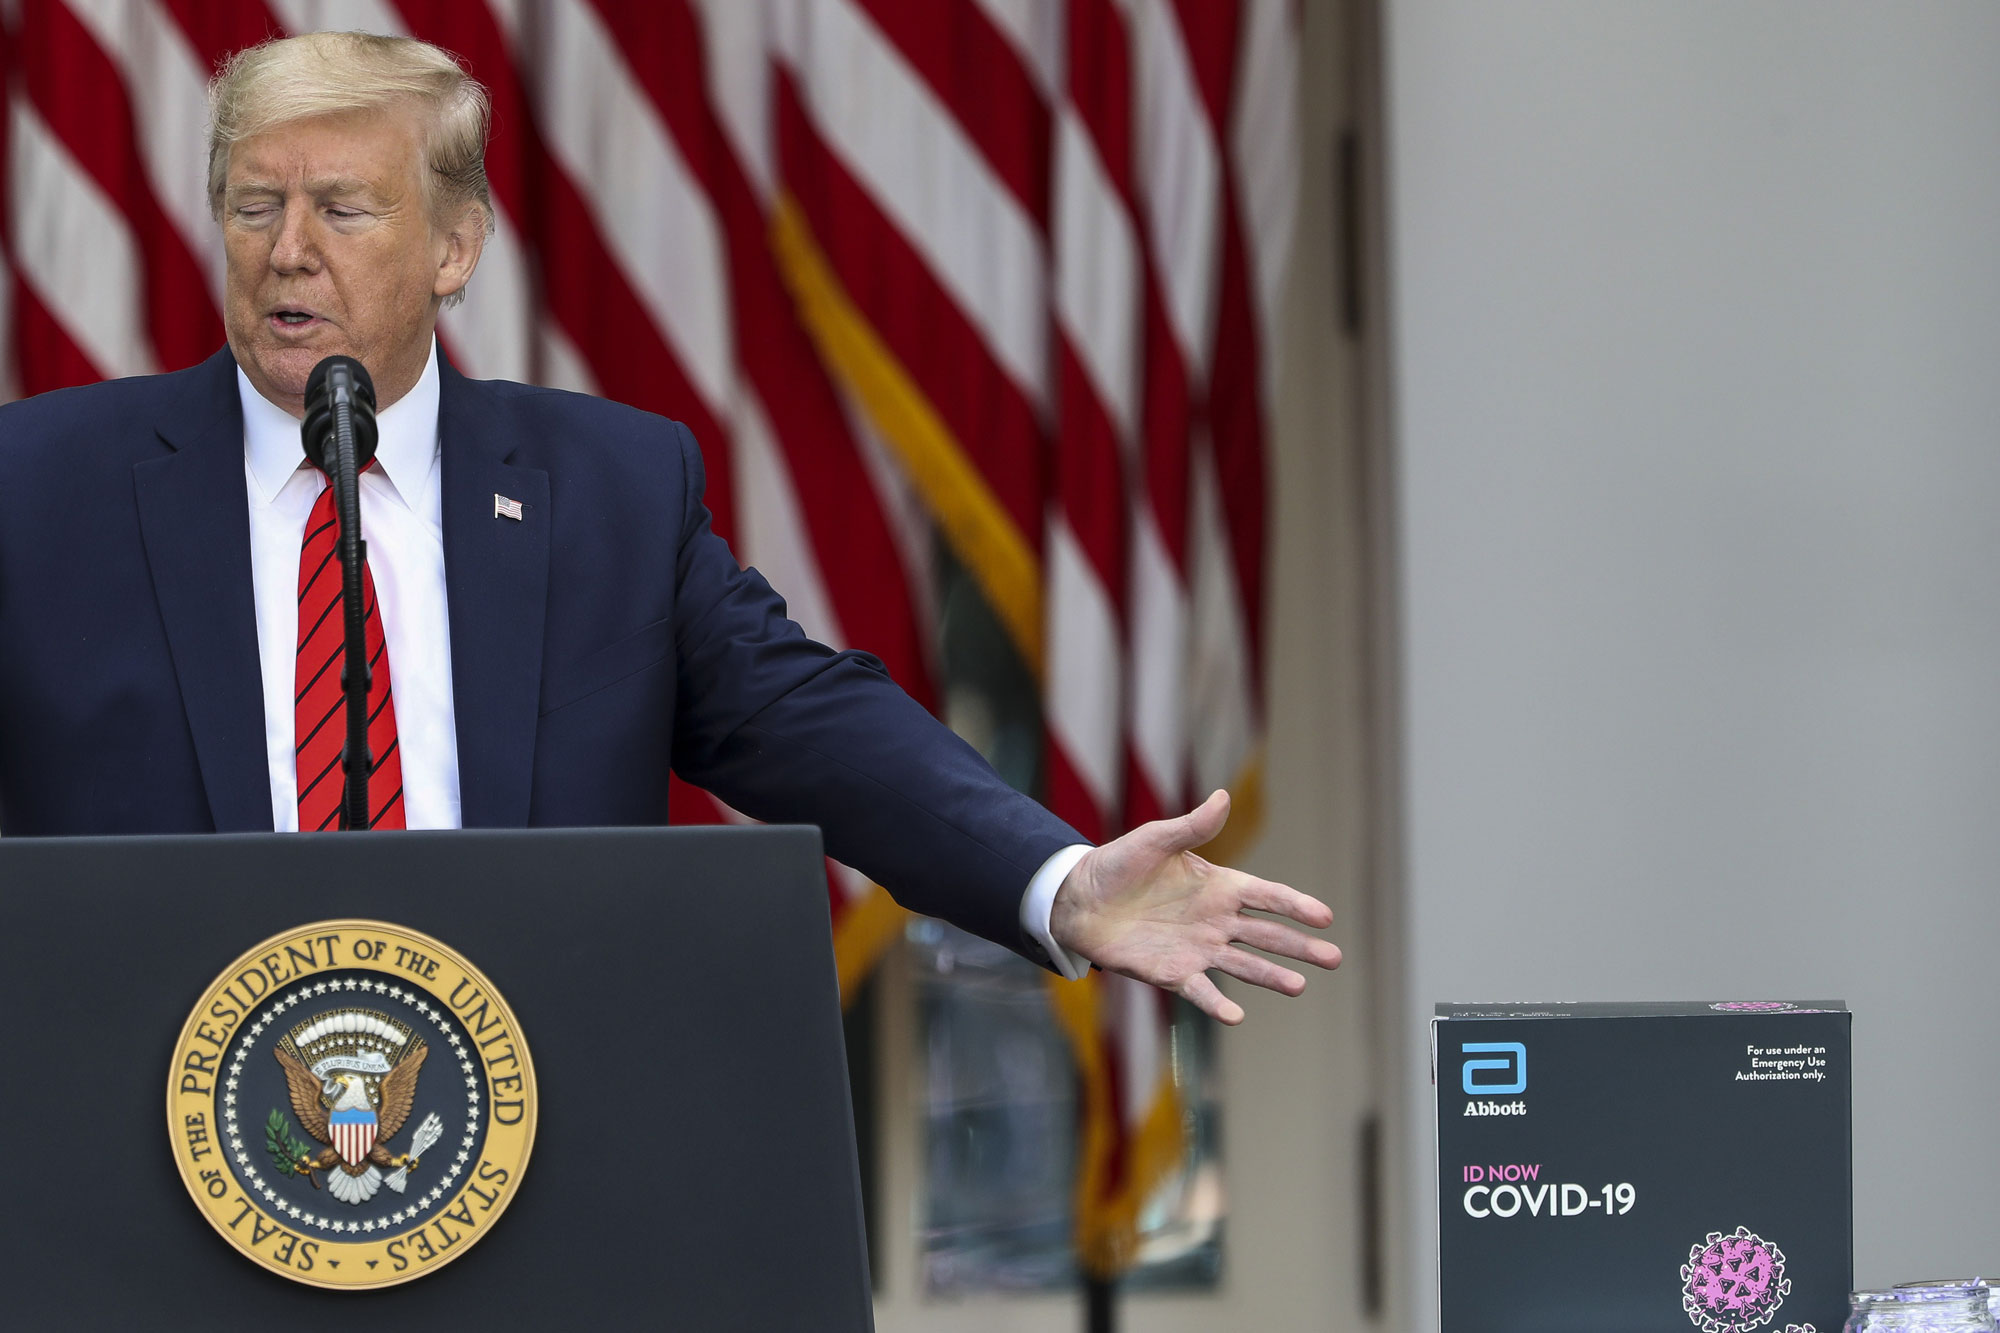 An Abbott Laboratories ID Now Covid-19 test kit stands next to U.S. President Donald Trump speaking during a press briefing in the Rose Garden of the White House in Washington, on May 11.